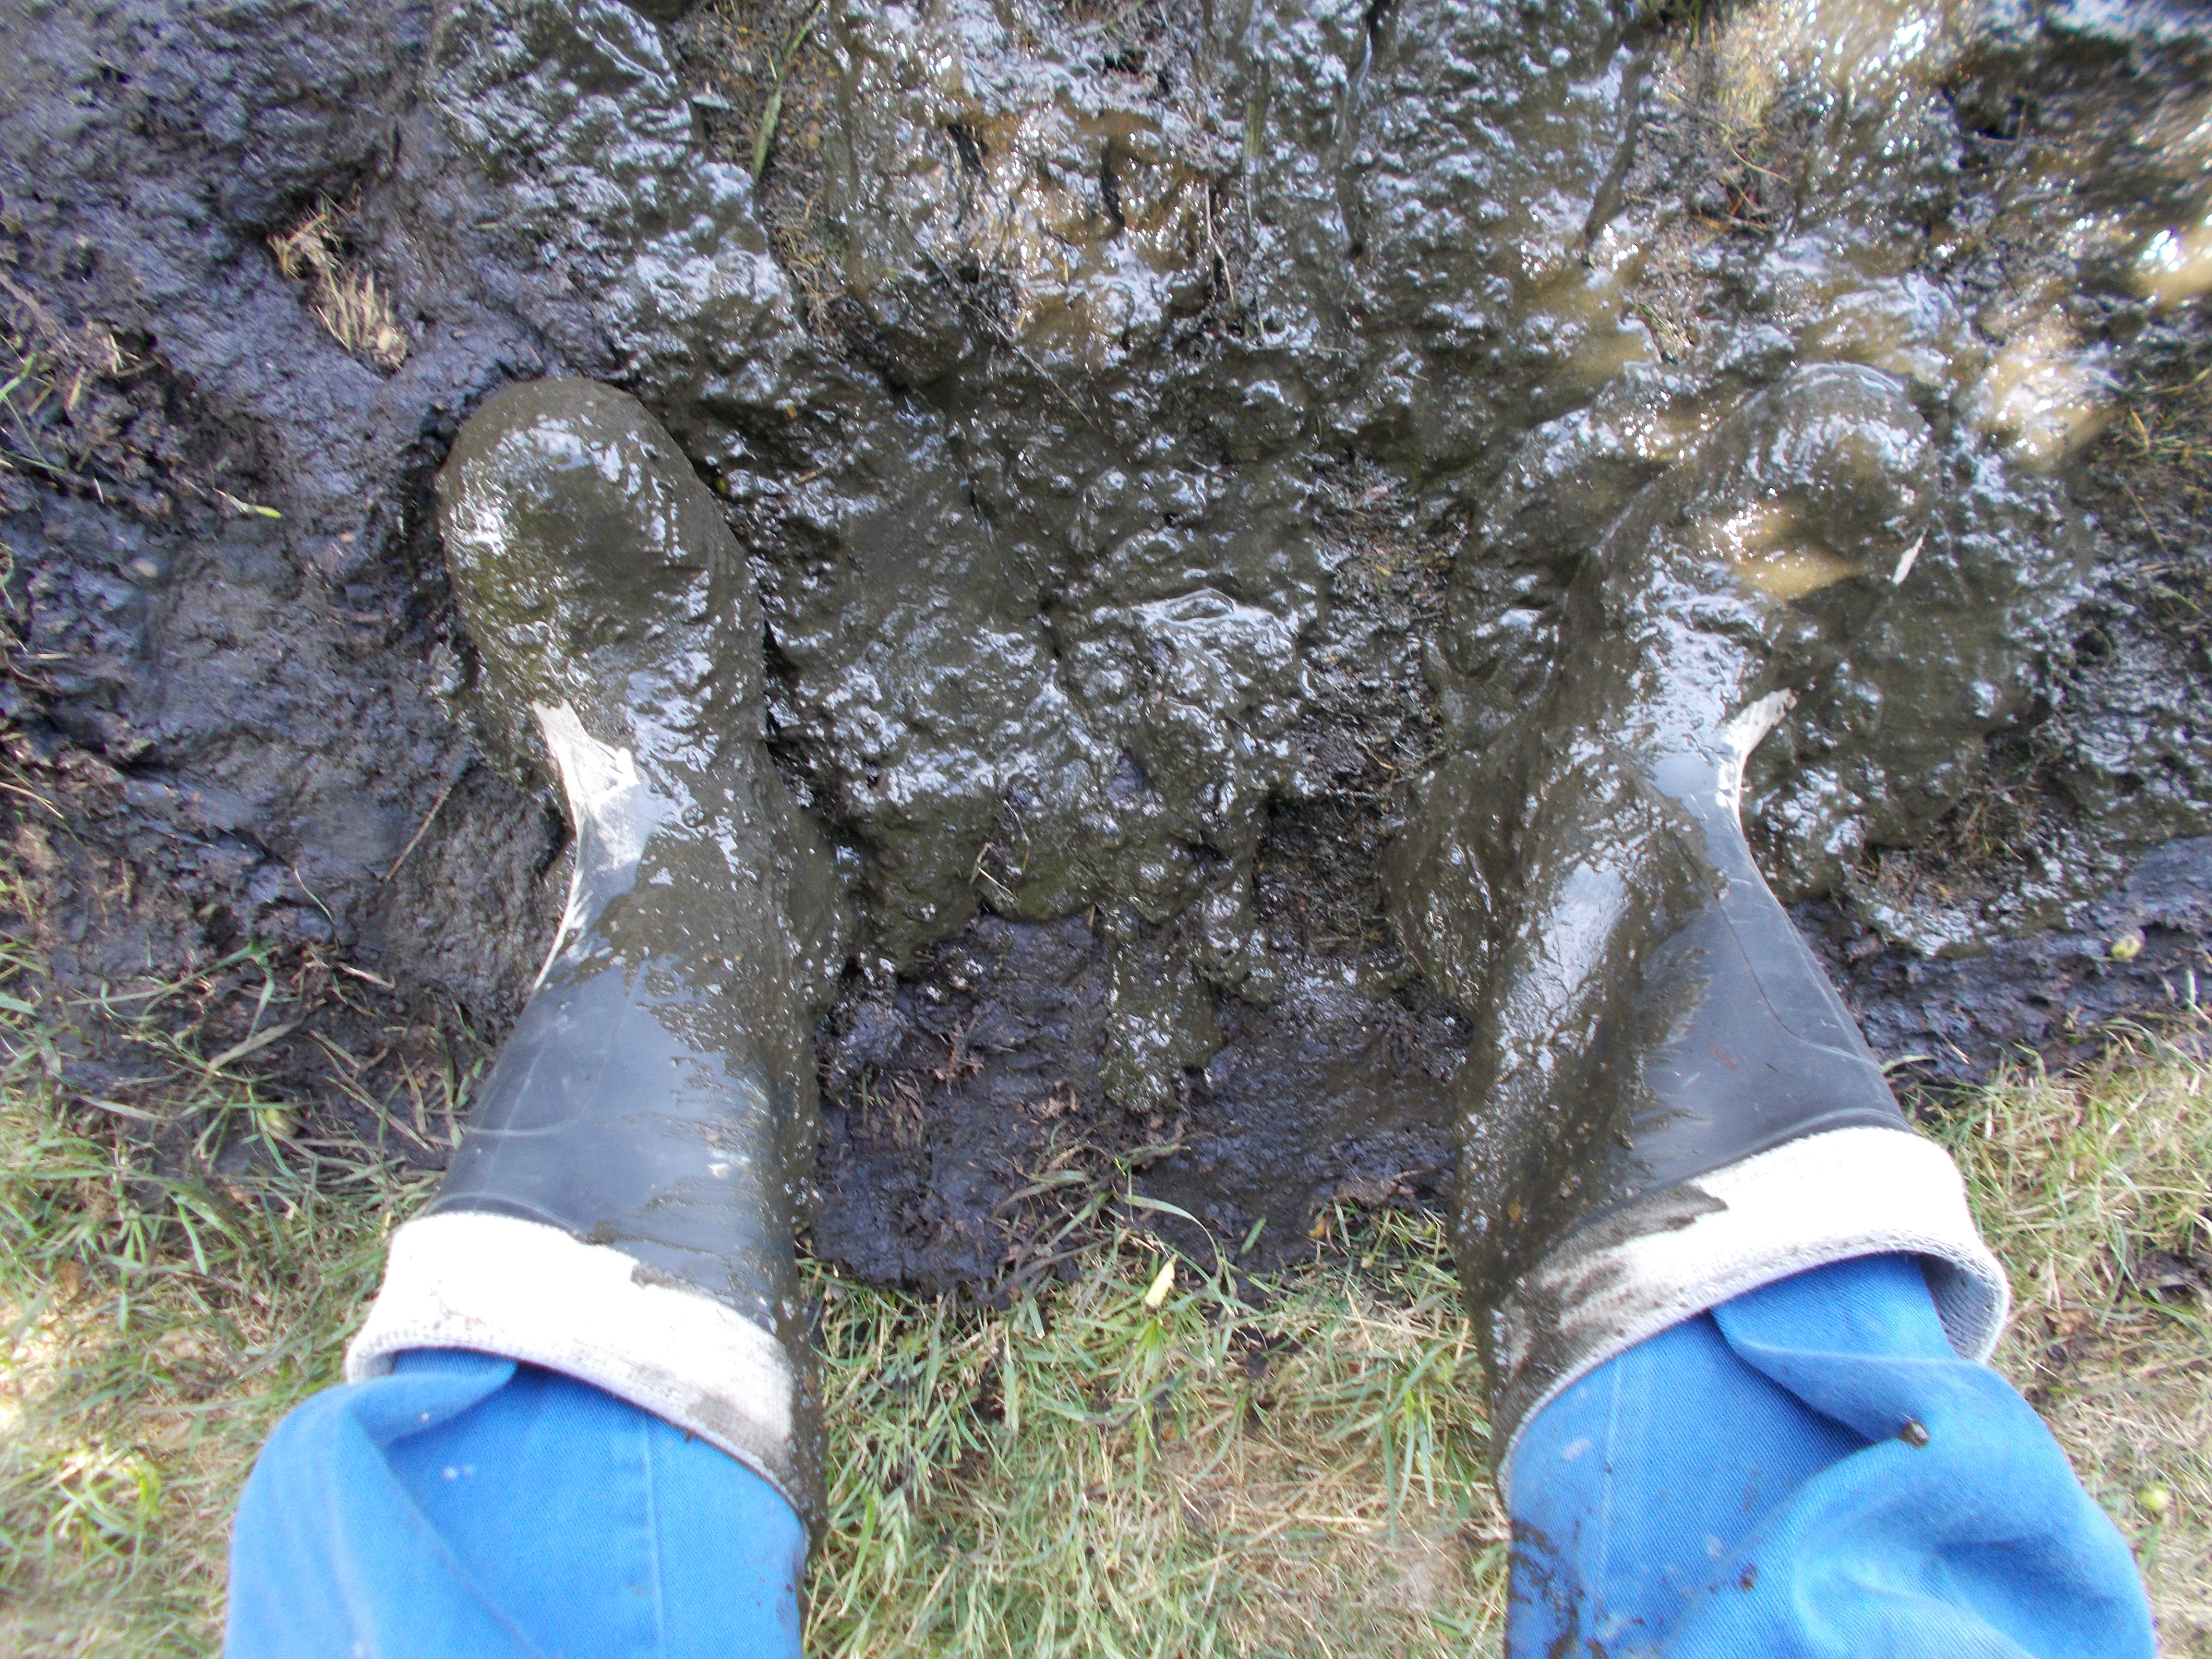 stomping in mud and manure